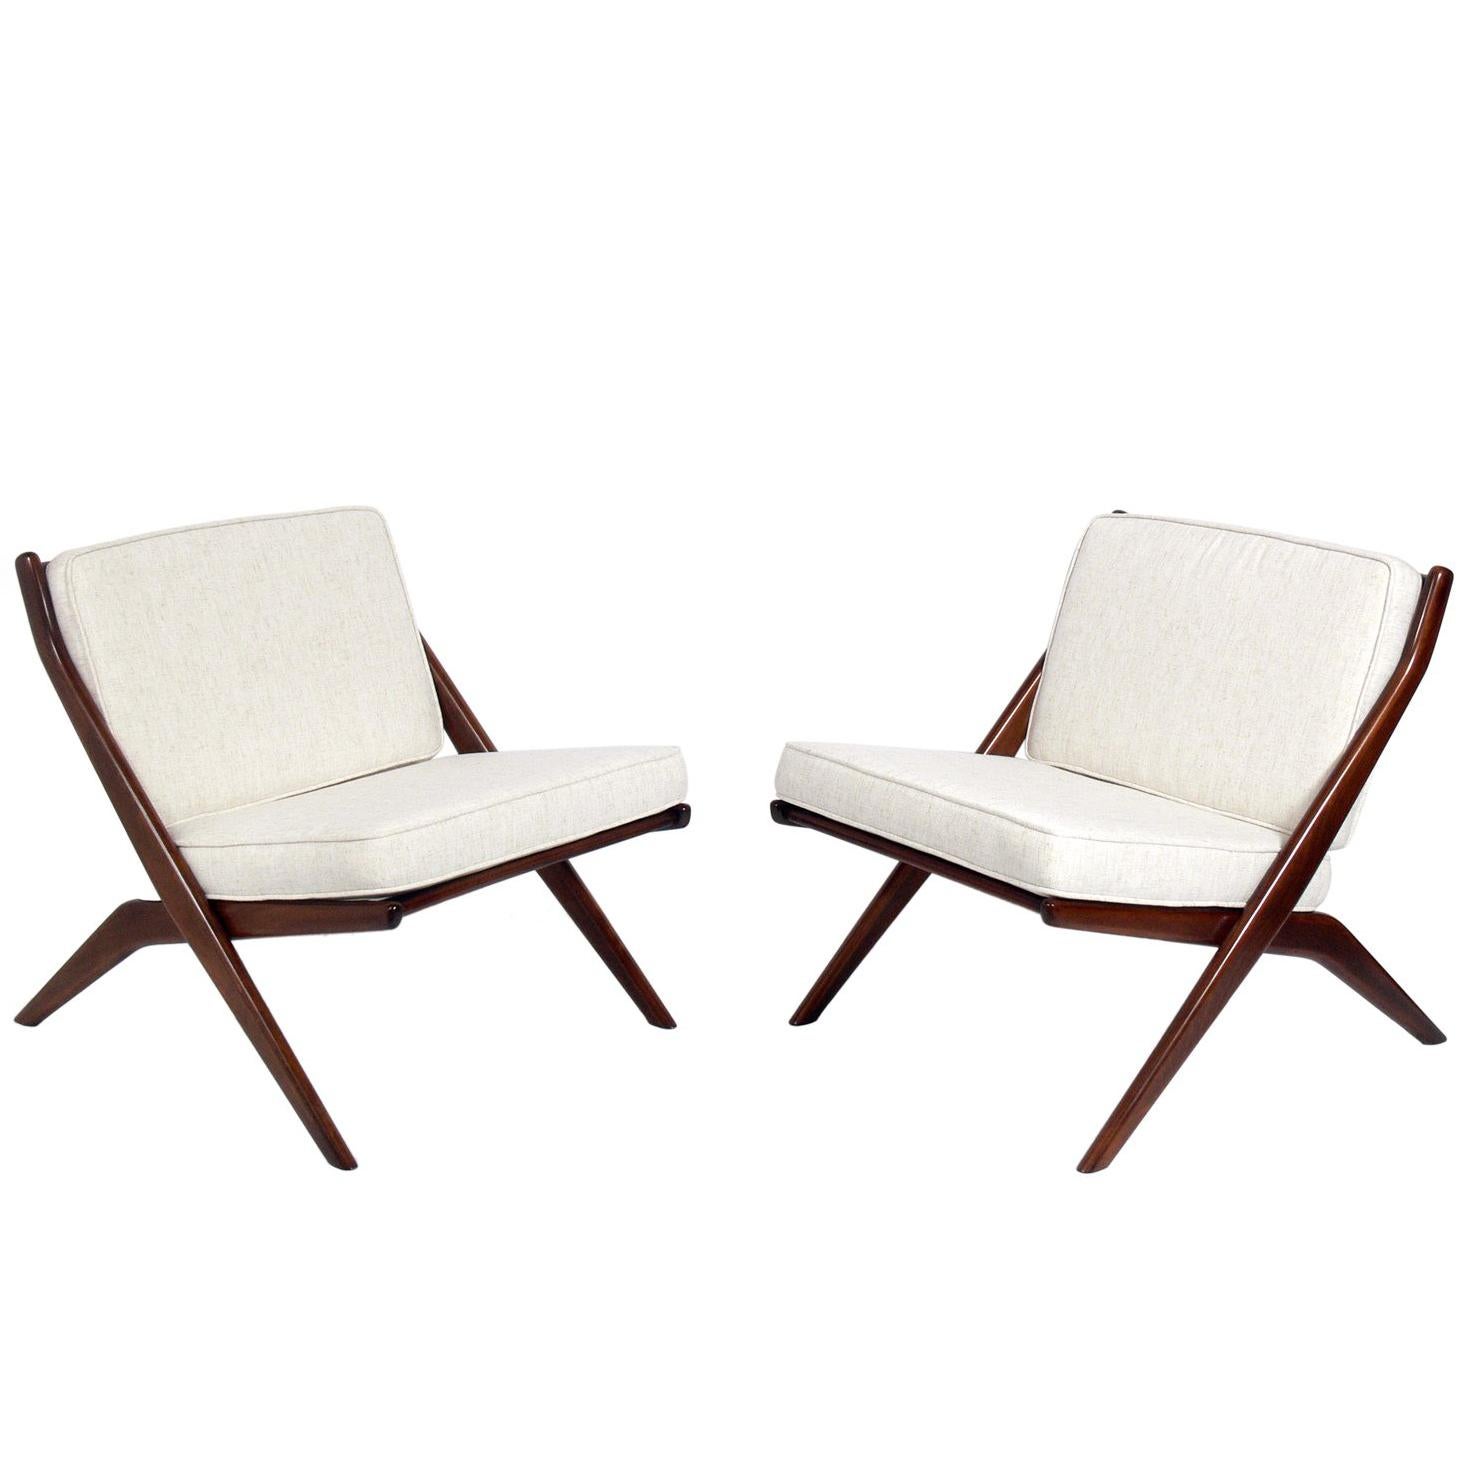 Pair of Sculptural Scissor Chairs by Folke Ohlsson